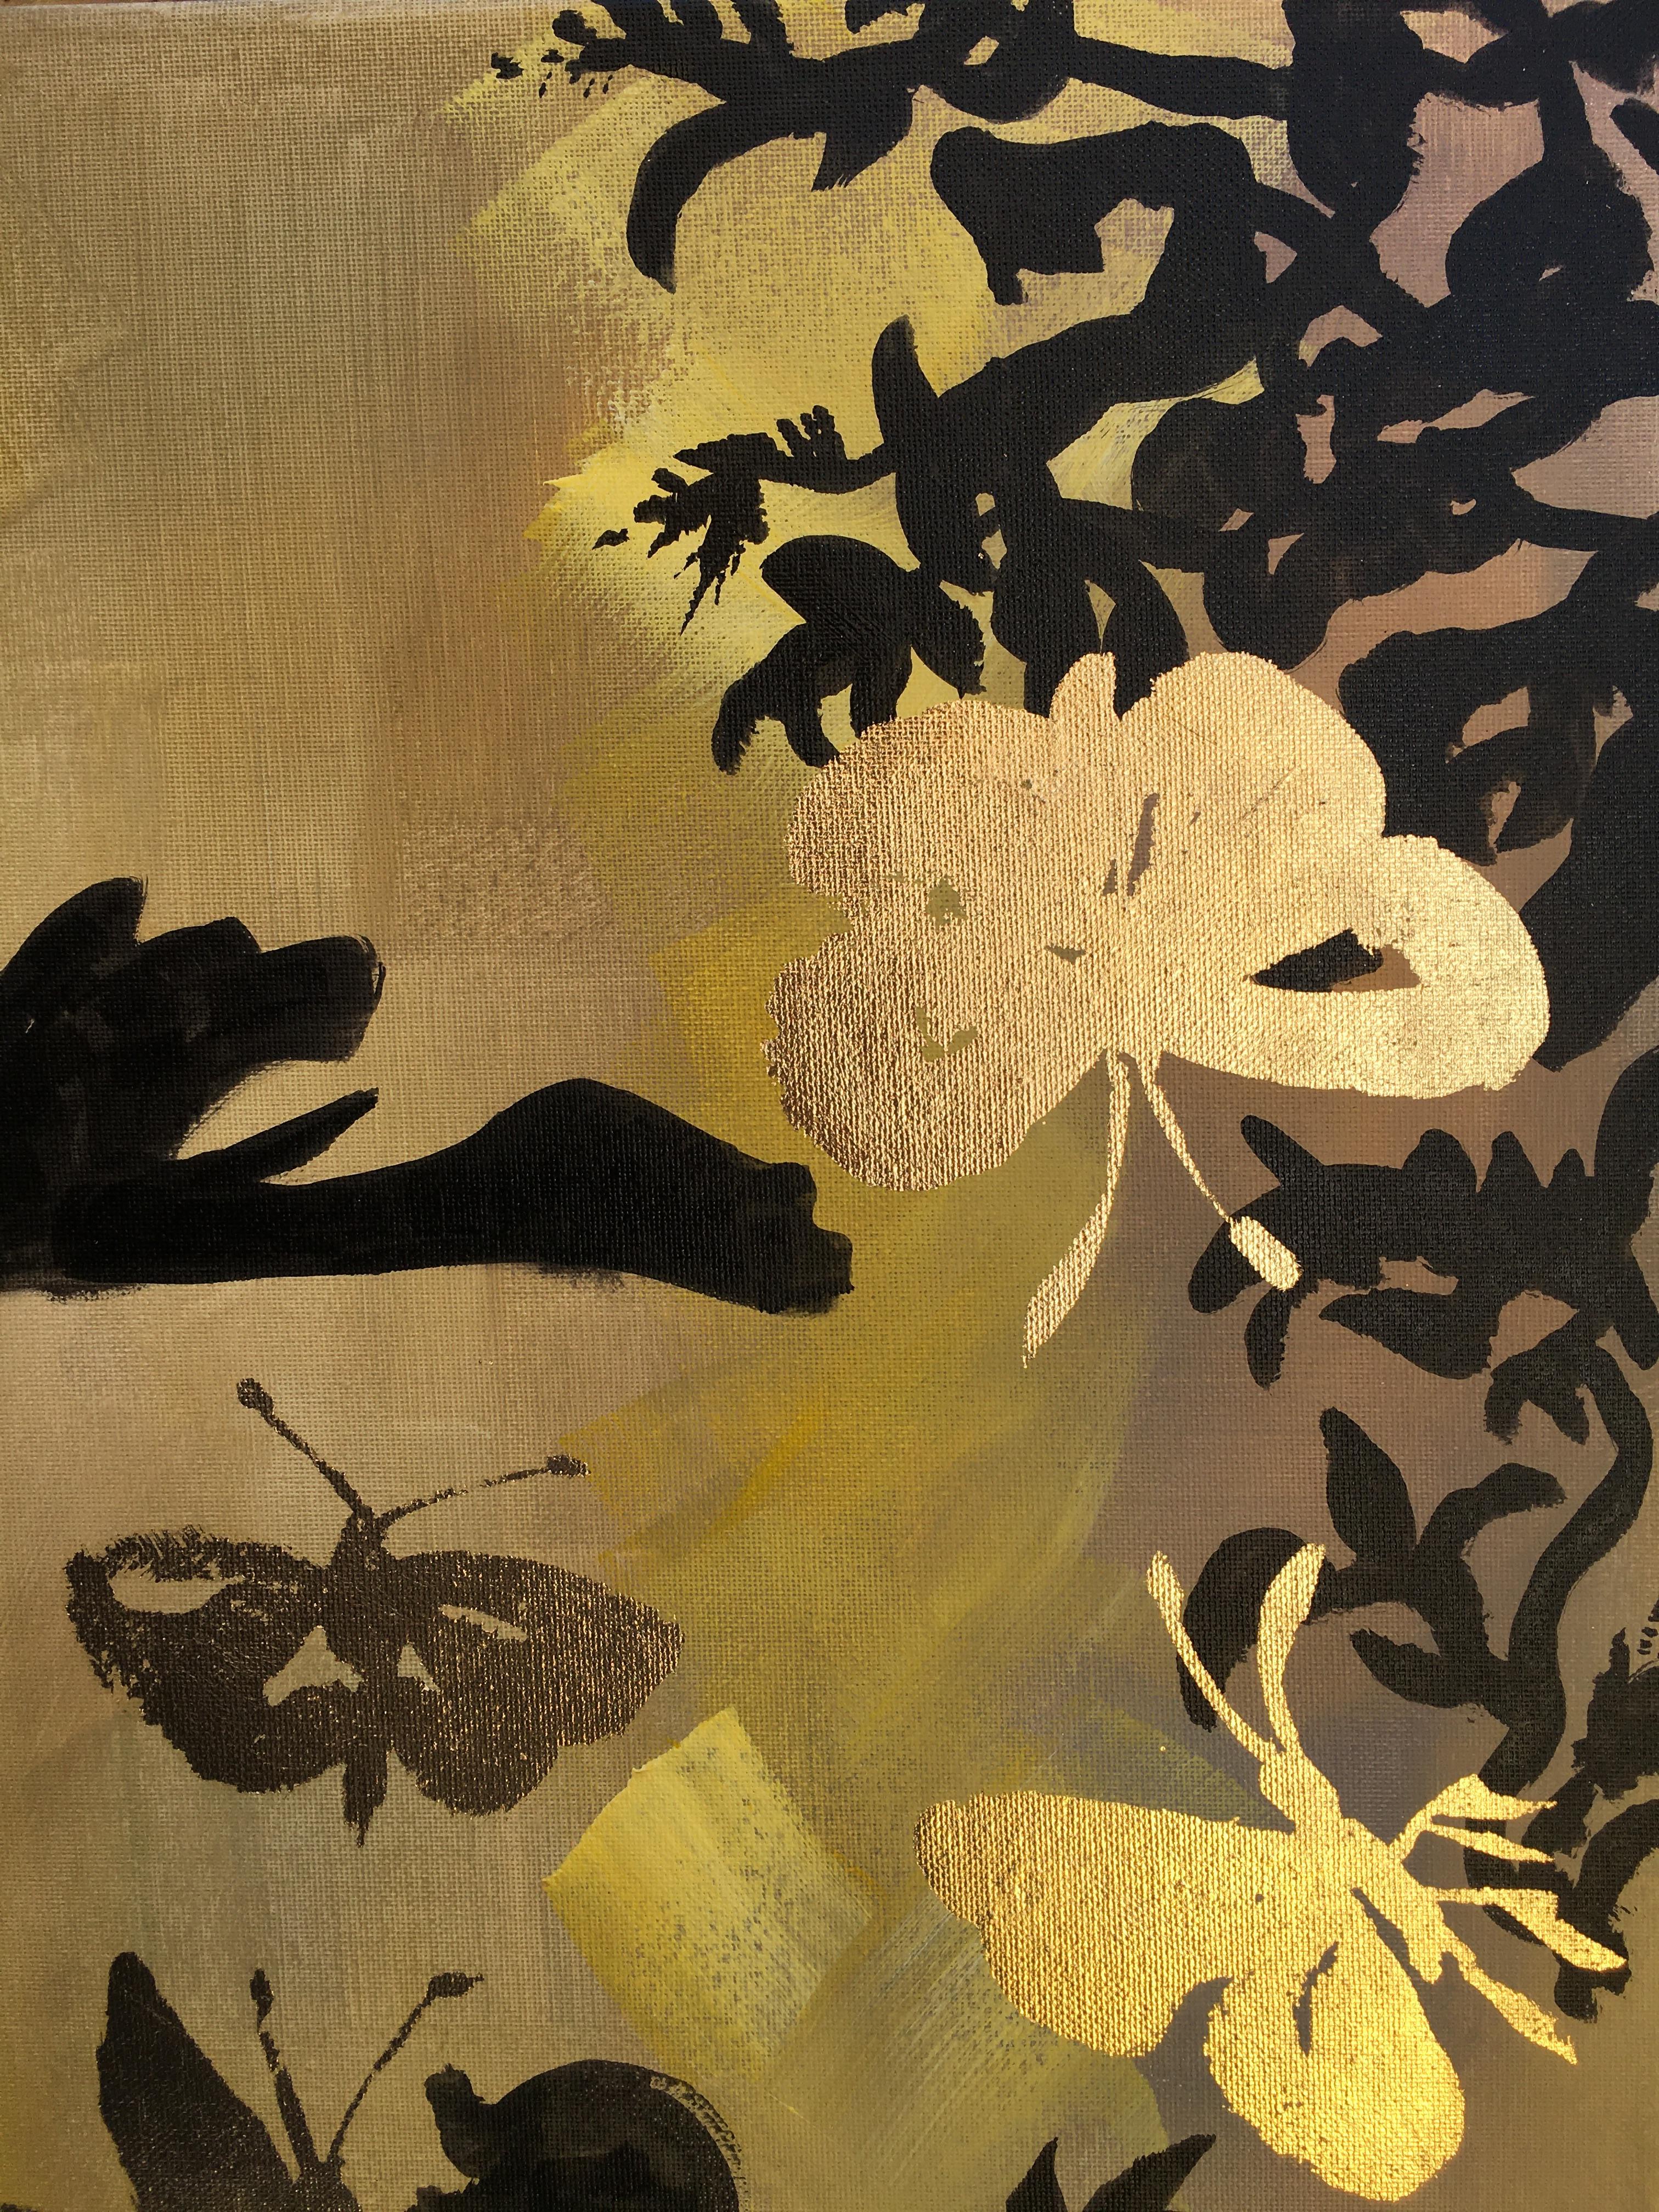 Original-Jay and Butterflies-Abstract-Expression-Gold Leaf-UK Awarded Artist 6